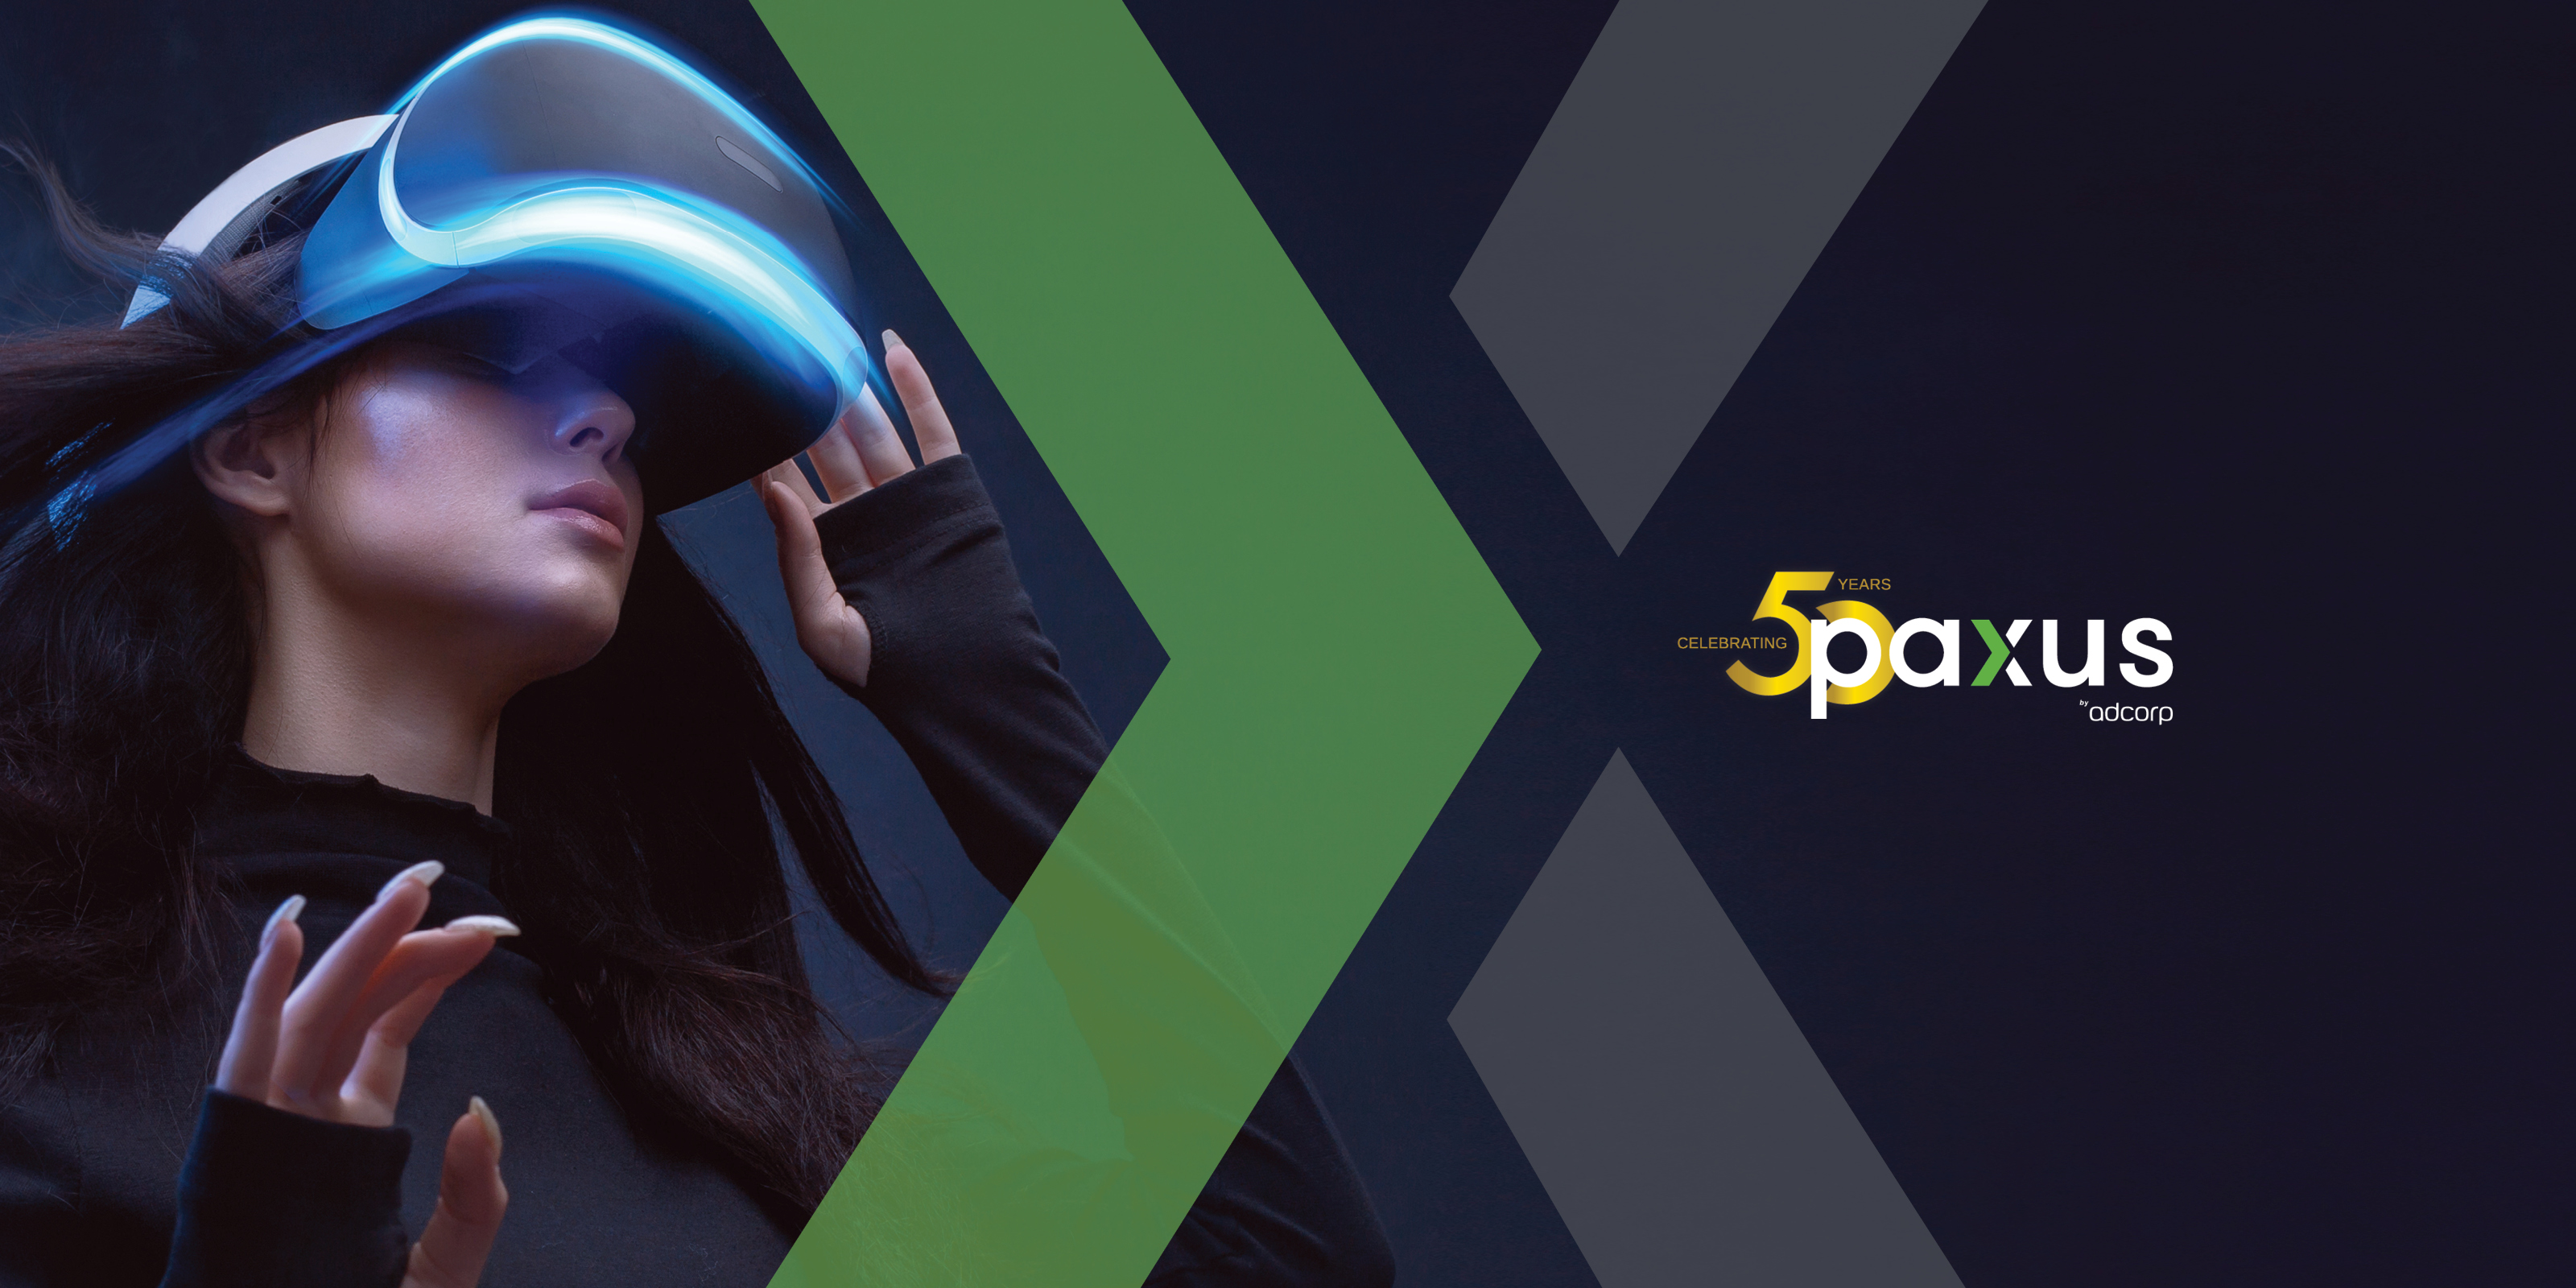 A person immersed in a virtual reality experience, wearing a futuristic vr headset, highlighted by a vibrant blue light, set against an abstract background split by geometric shapes, with the paxus logo commemorating 50 years.